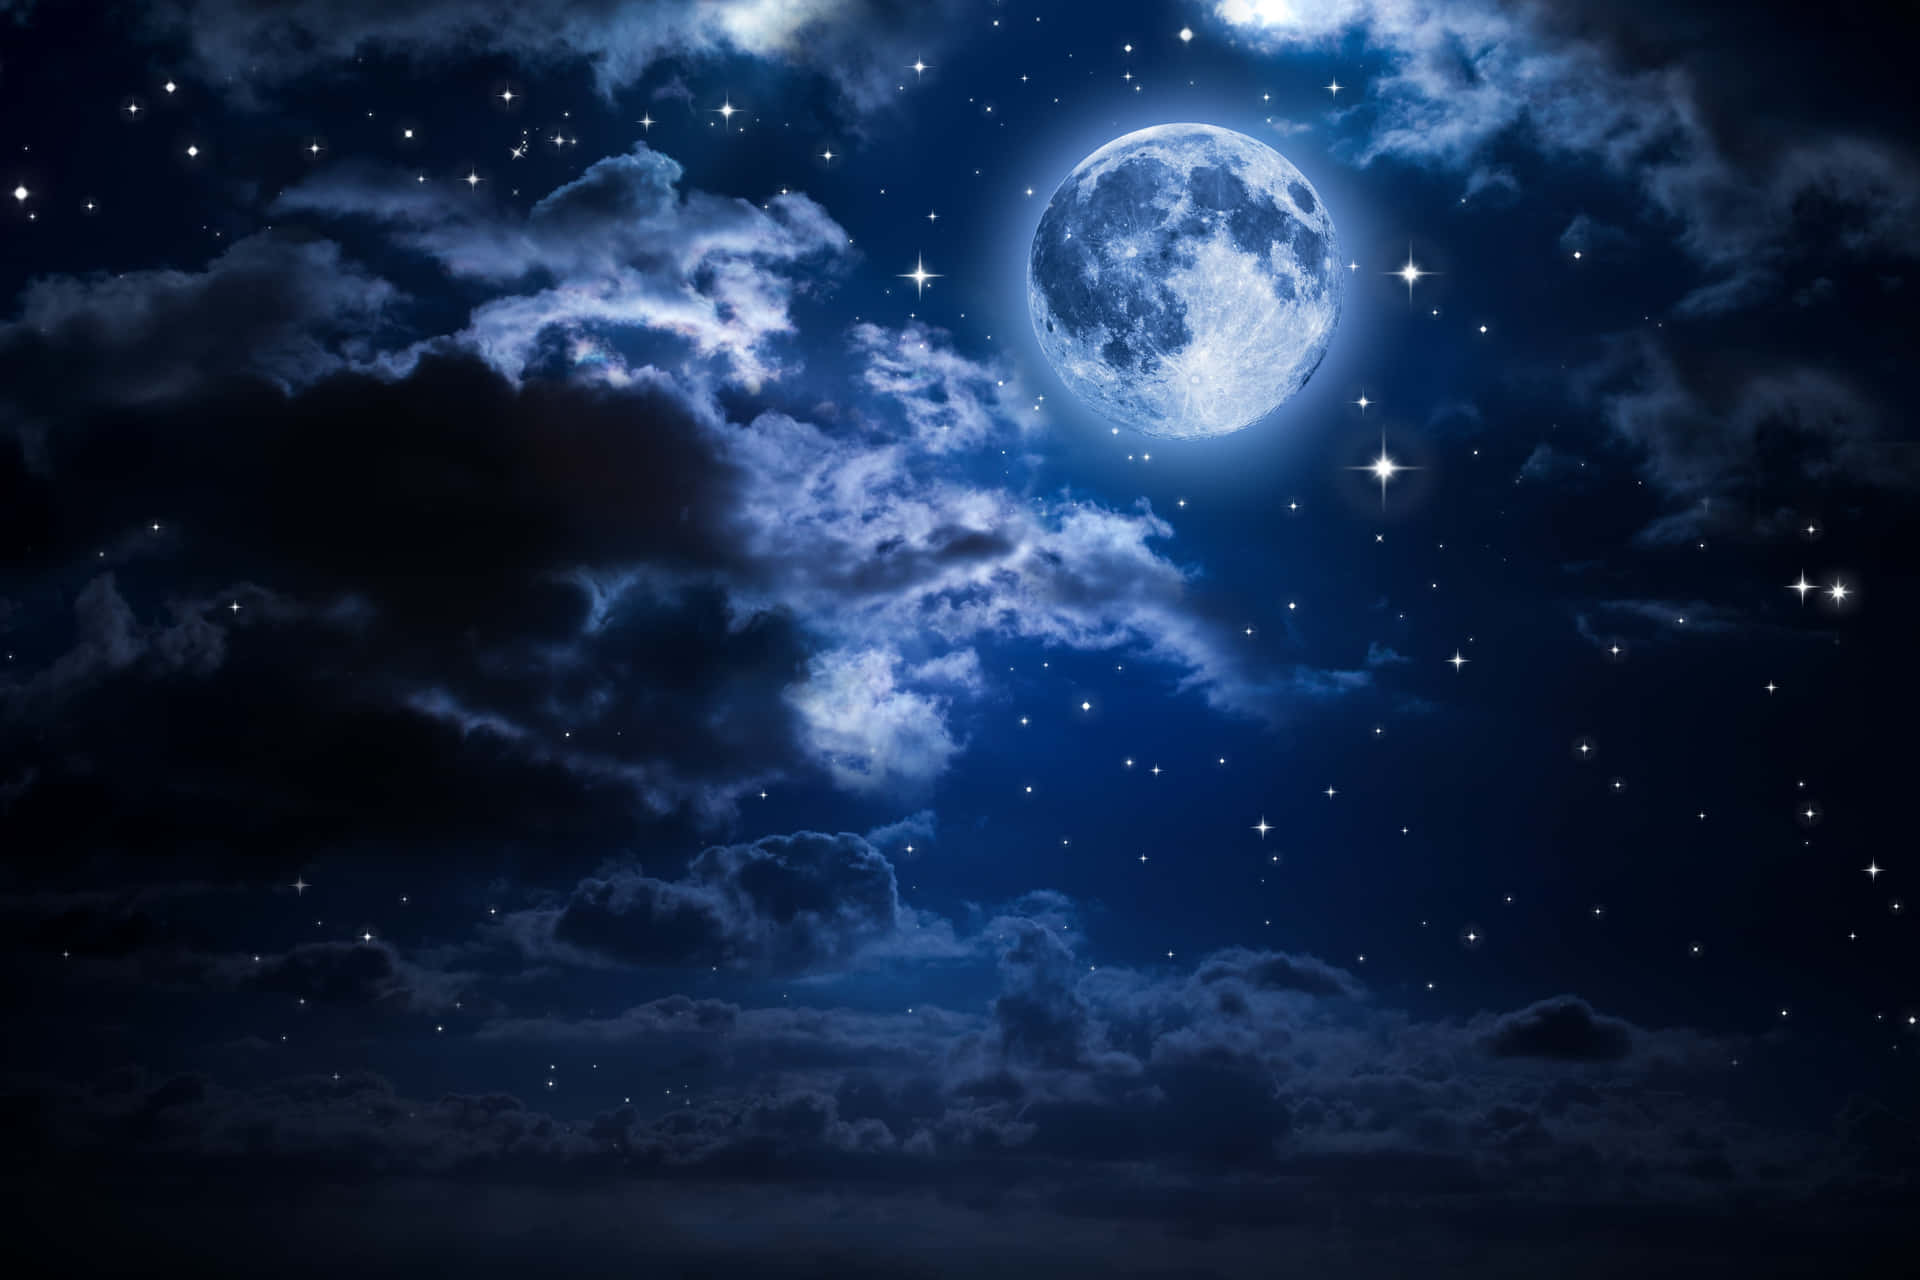 Embrace the dusk - the mesmerizing beauty of a moon night Wallpaper